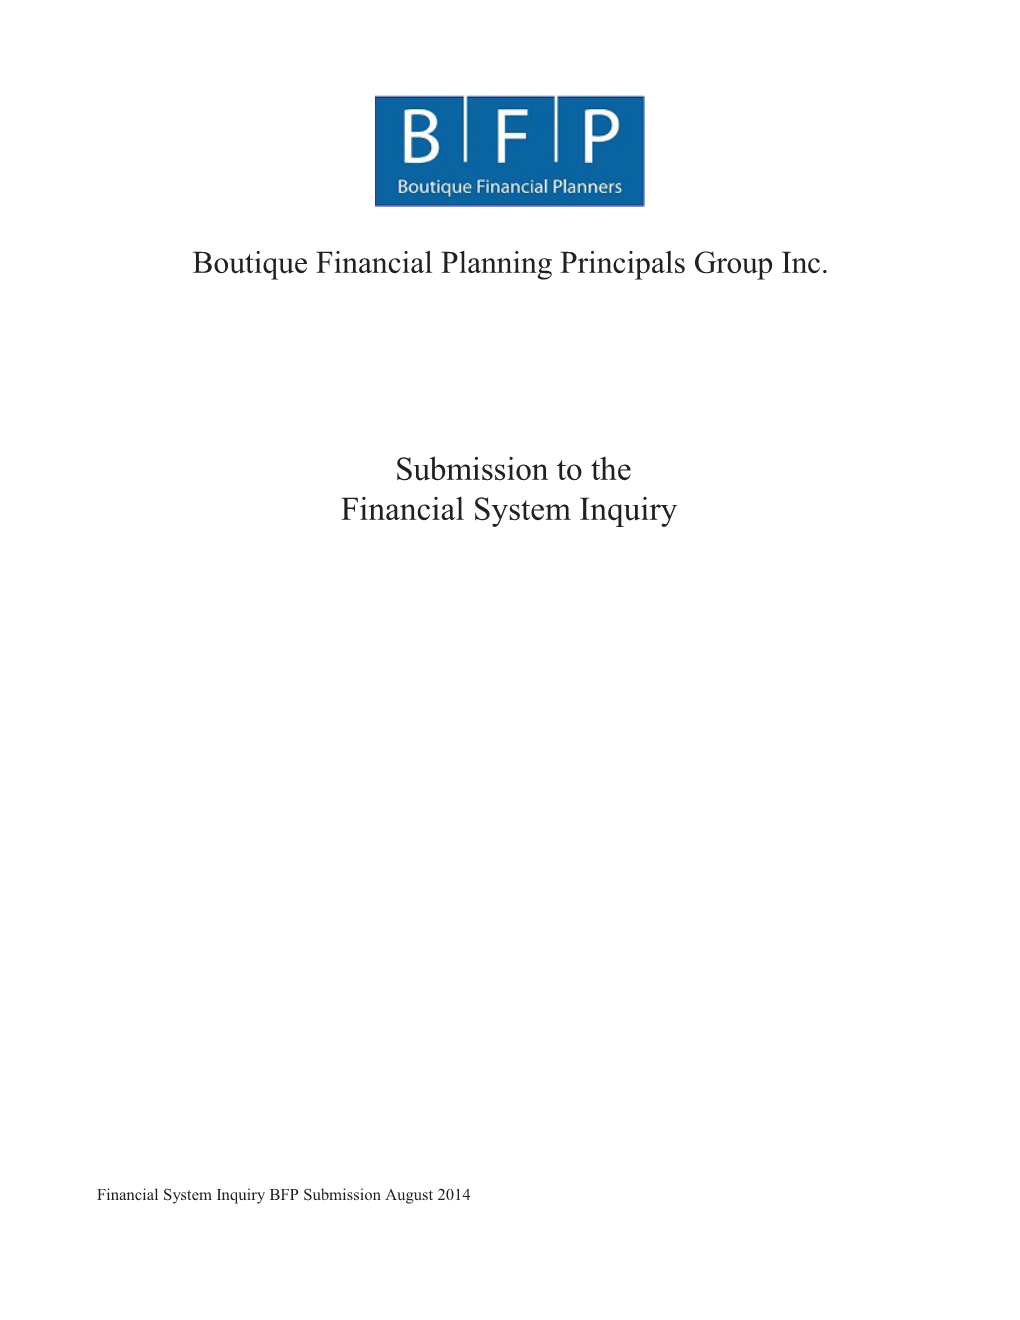 Boutique Financial Planners - Submission to the Financial System Inquiry. Issues Set Out